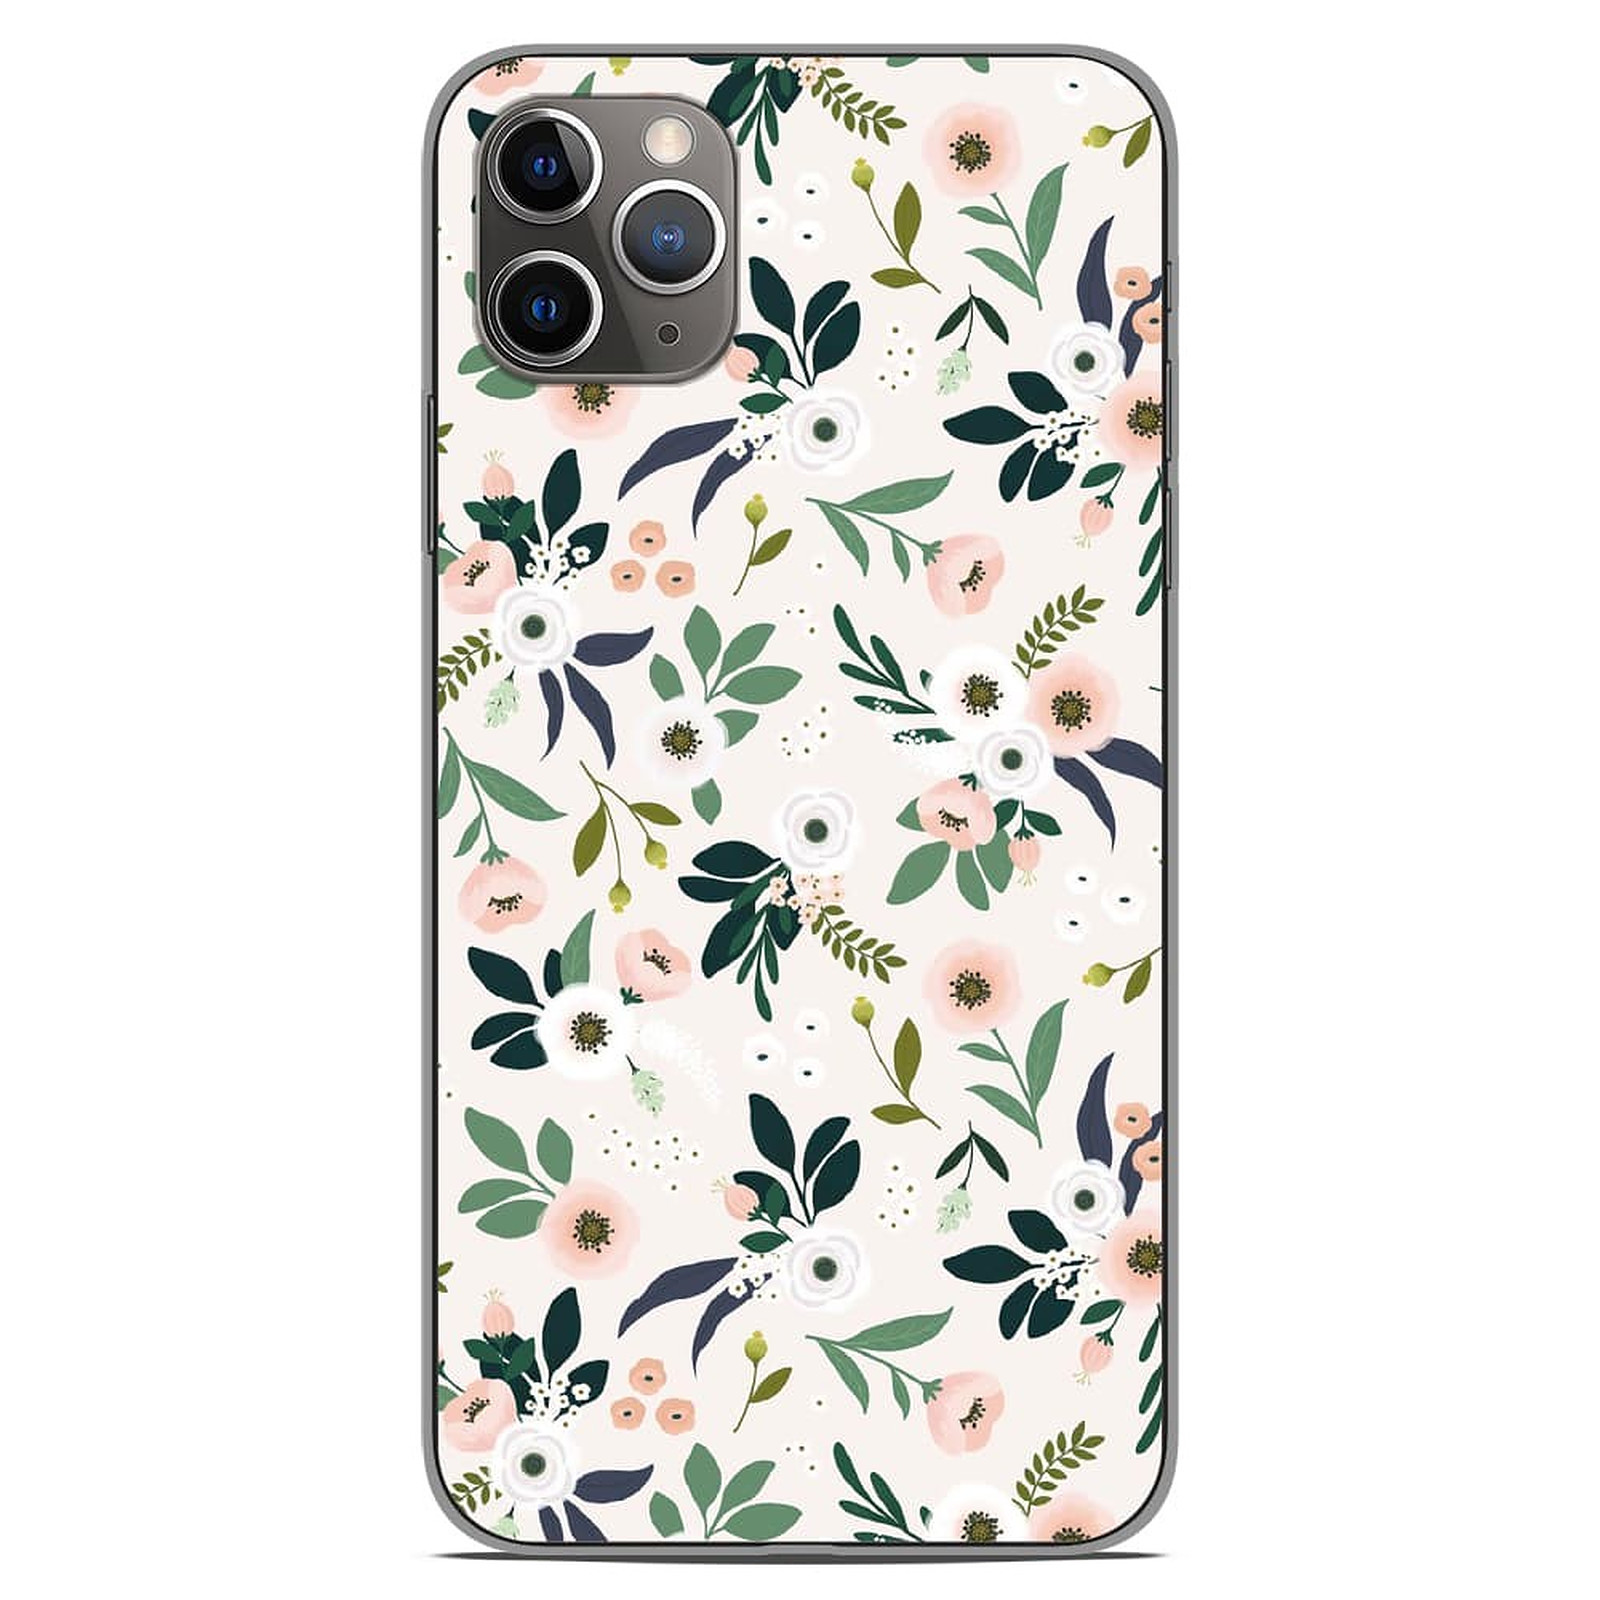 1001 Coques Coque silicone gel Apple iPhone 11 Pro Max motif Flowers - Coque telephone 1001Coques